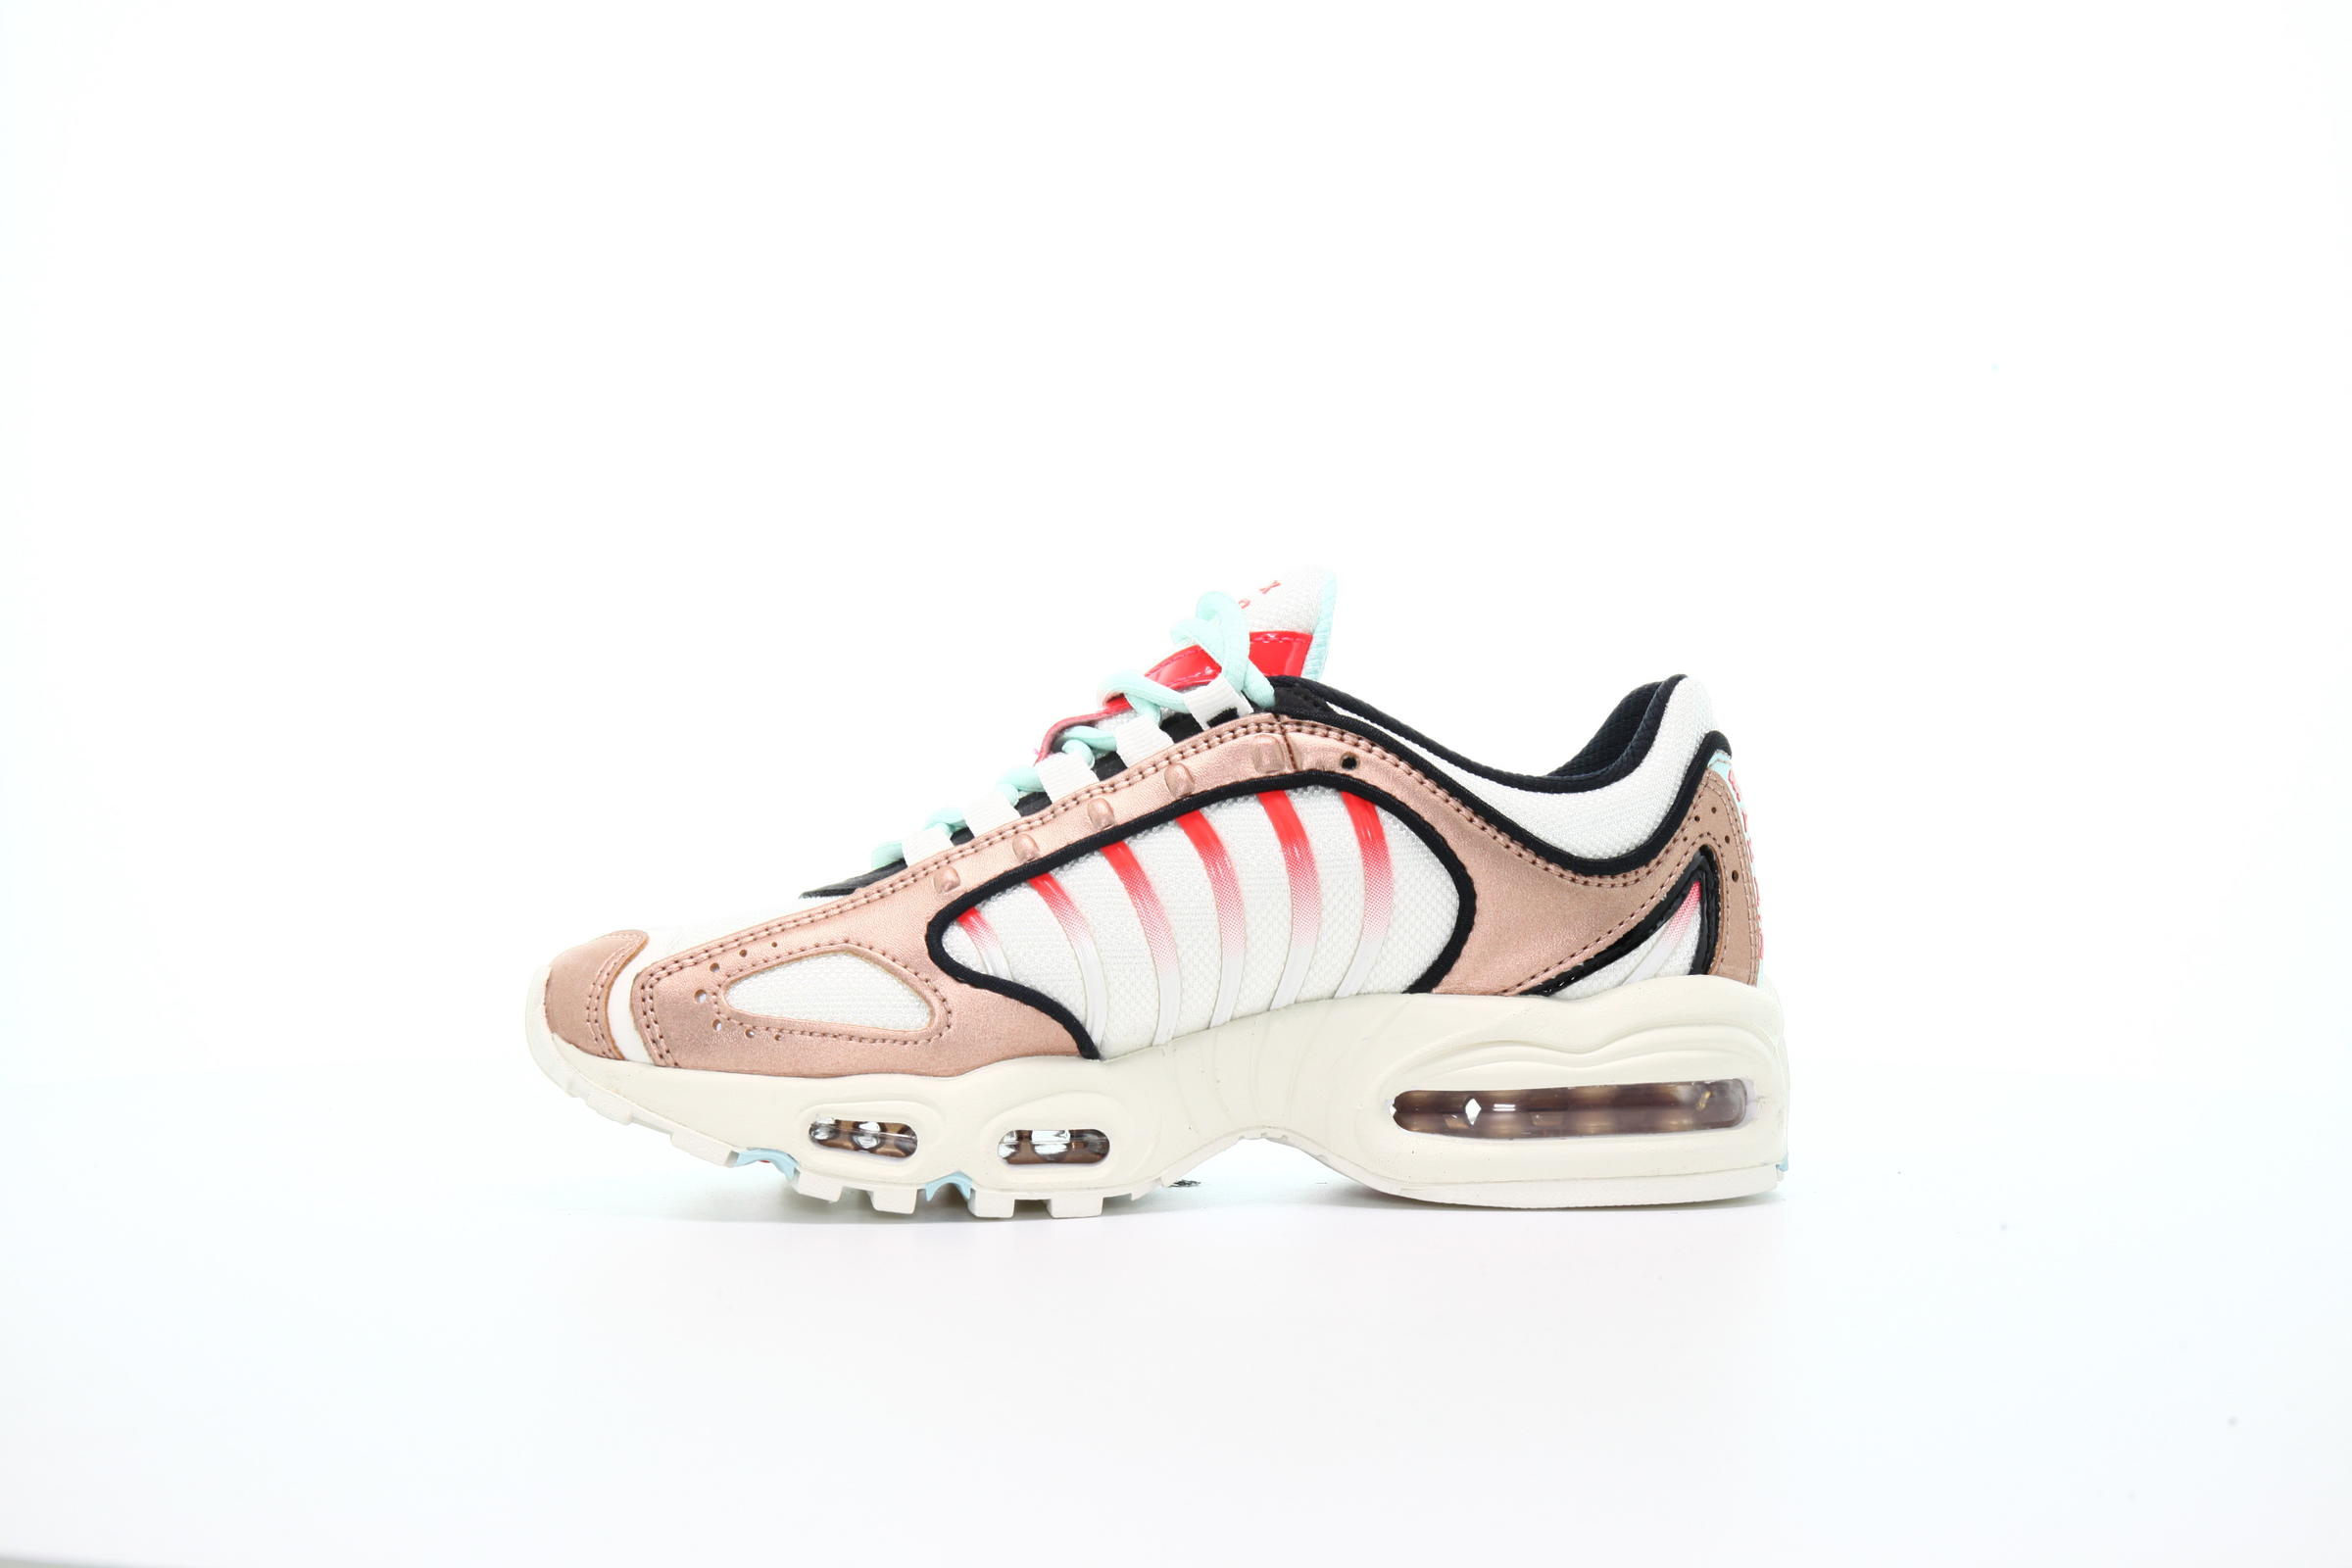 Nike WMNS Air Max Tailwind IV "Red"